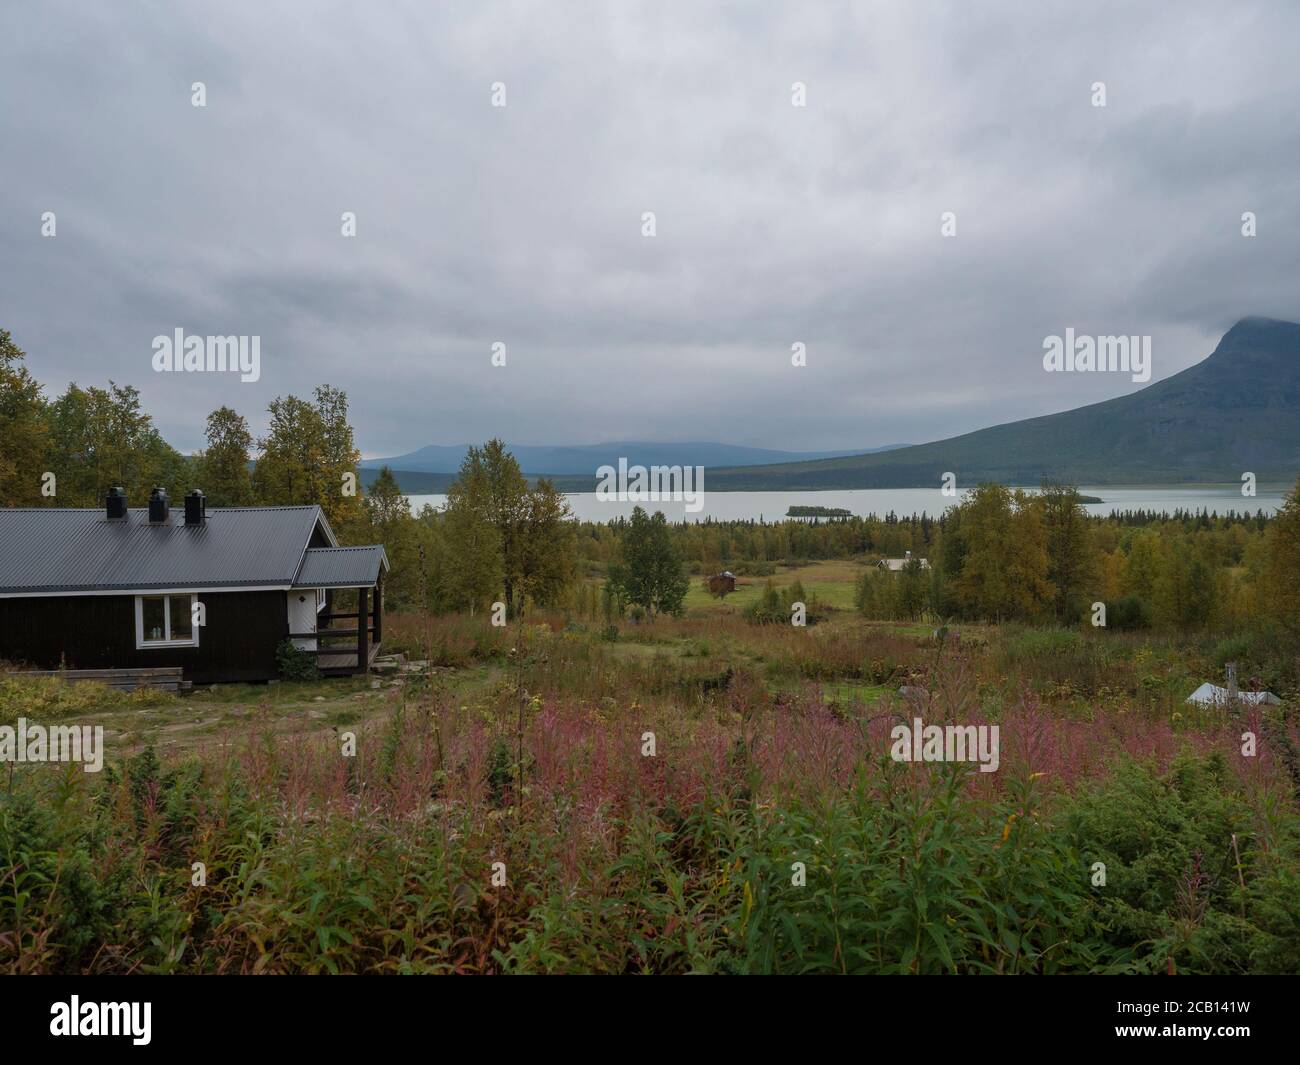 View on Aktse Fjallstuga STF mountain cabin hut at Sweden Lapland with Laitaure lake, green hills and birch tree. Cloudy rainy day on the Kungsleden Stock Photo